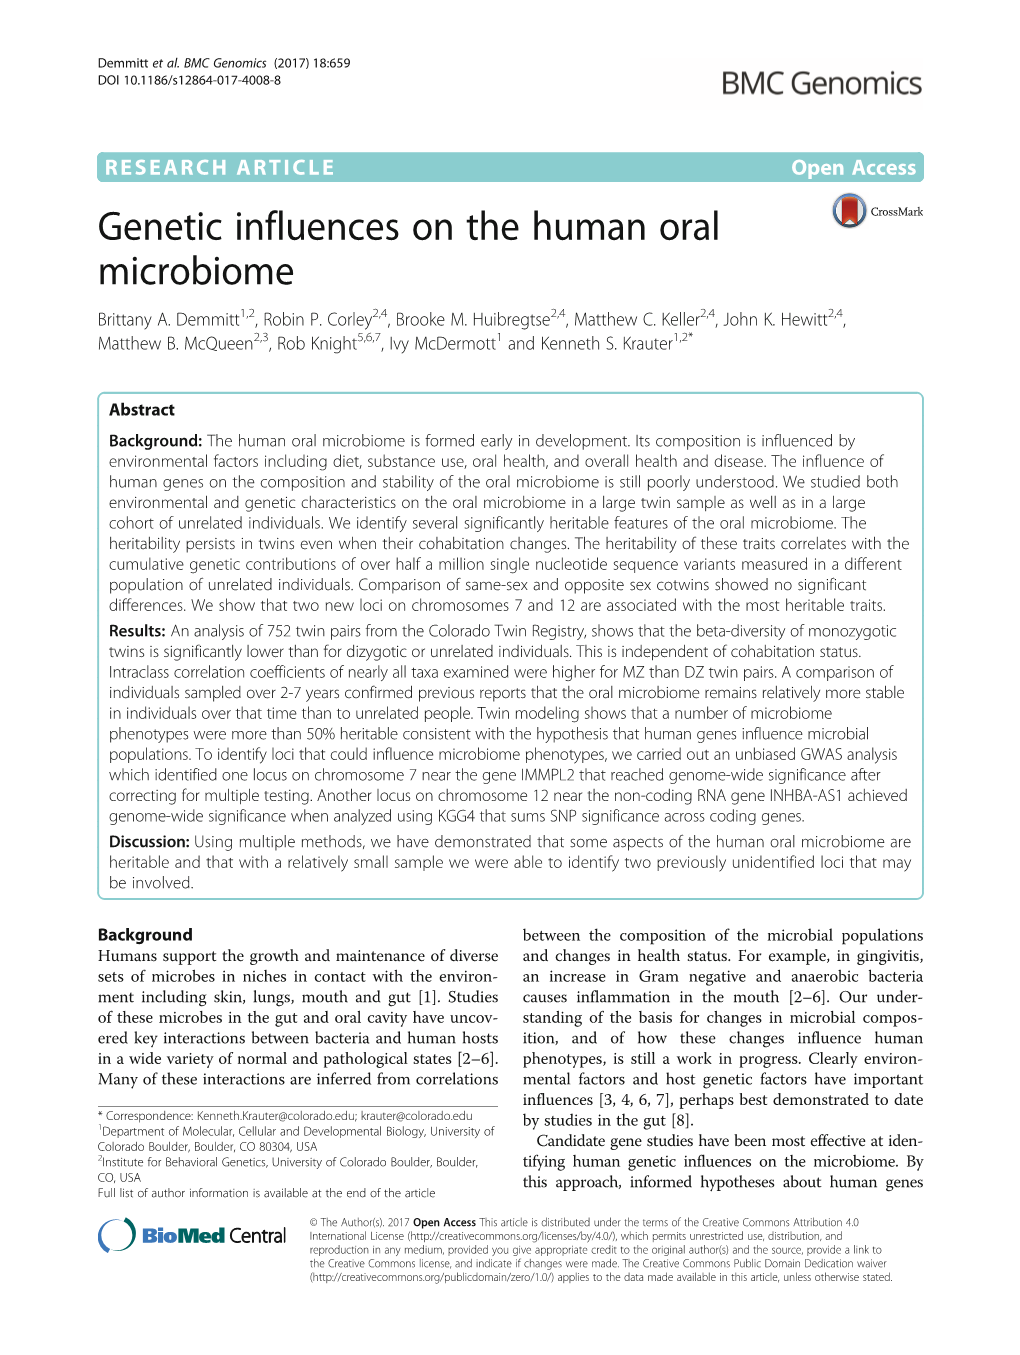 Genetic Influences on the Human Oral Microbiome Brittany A